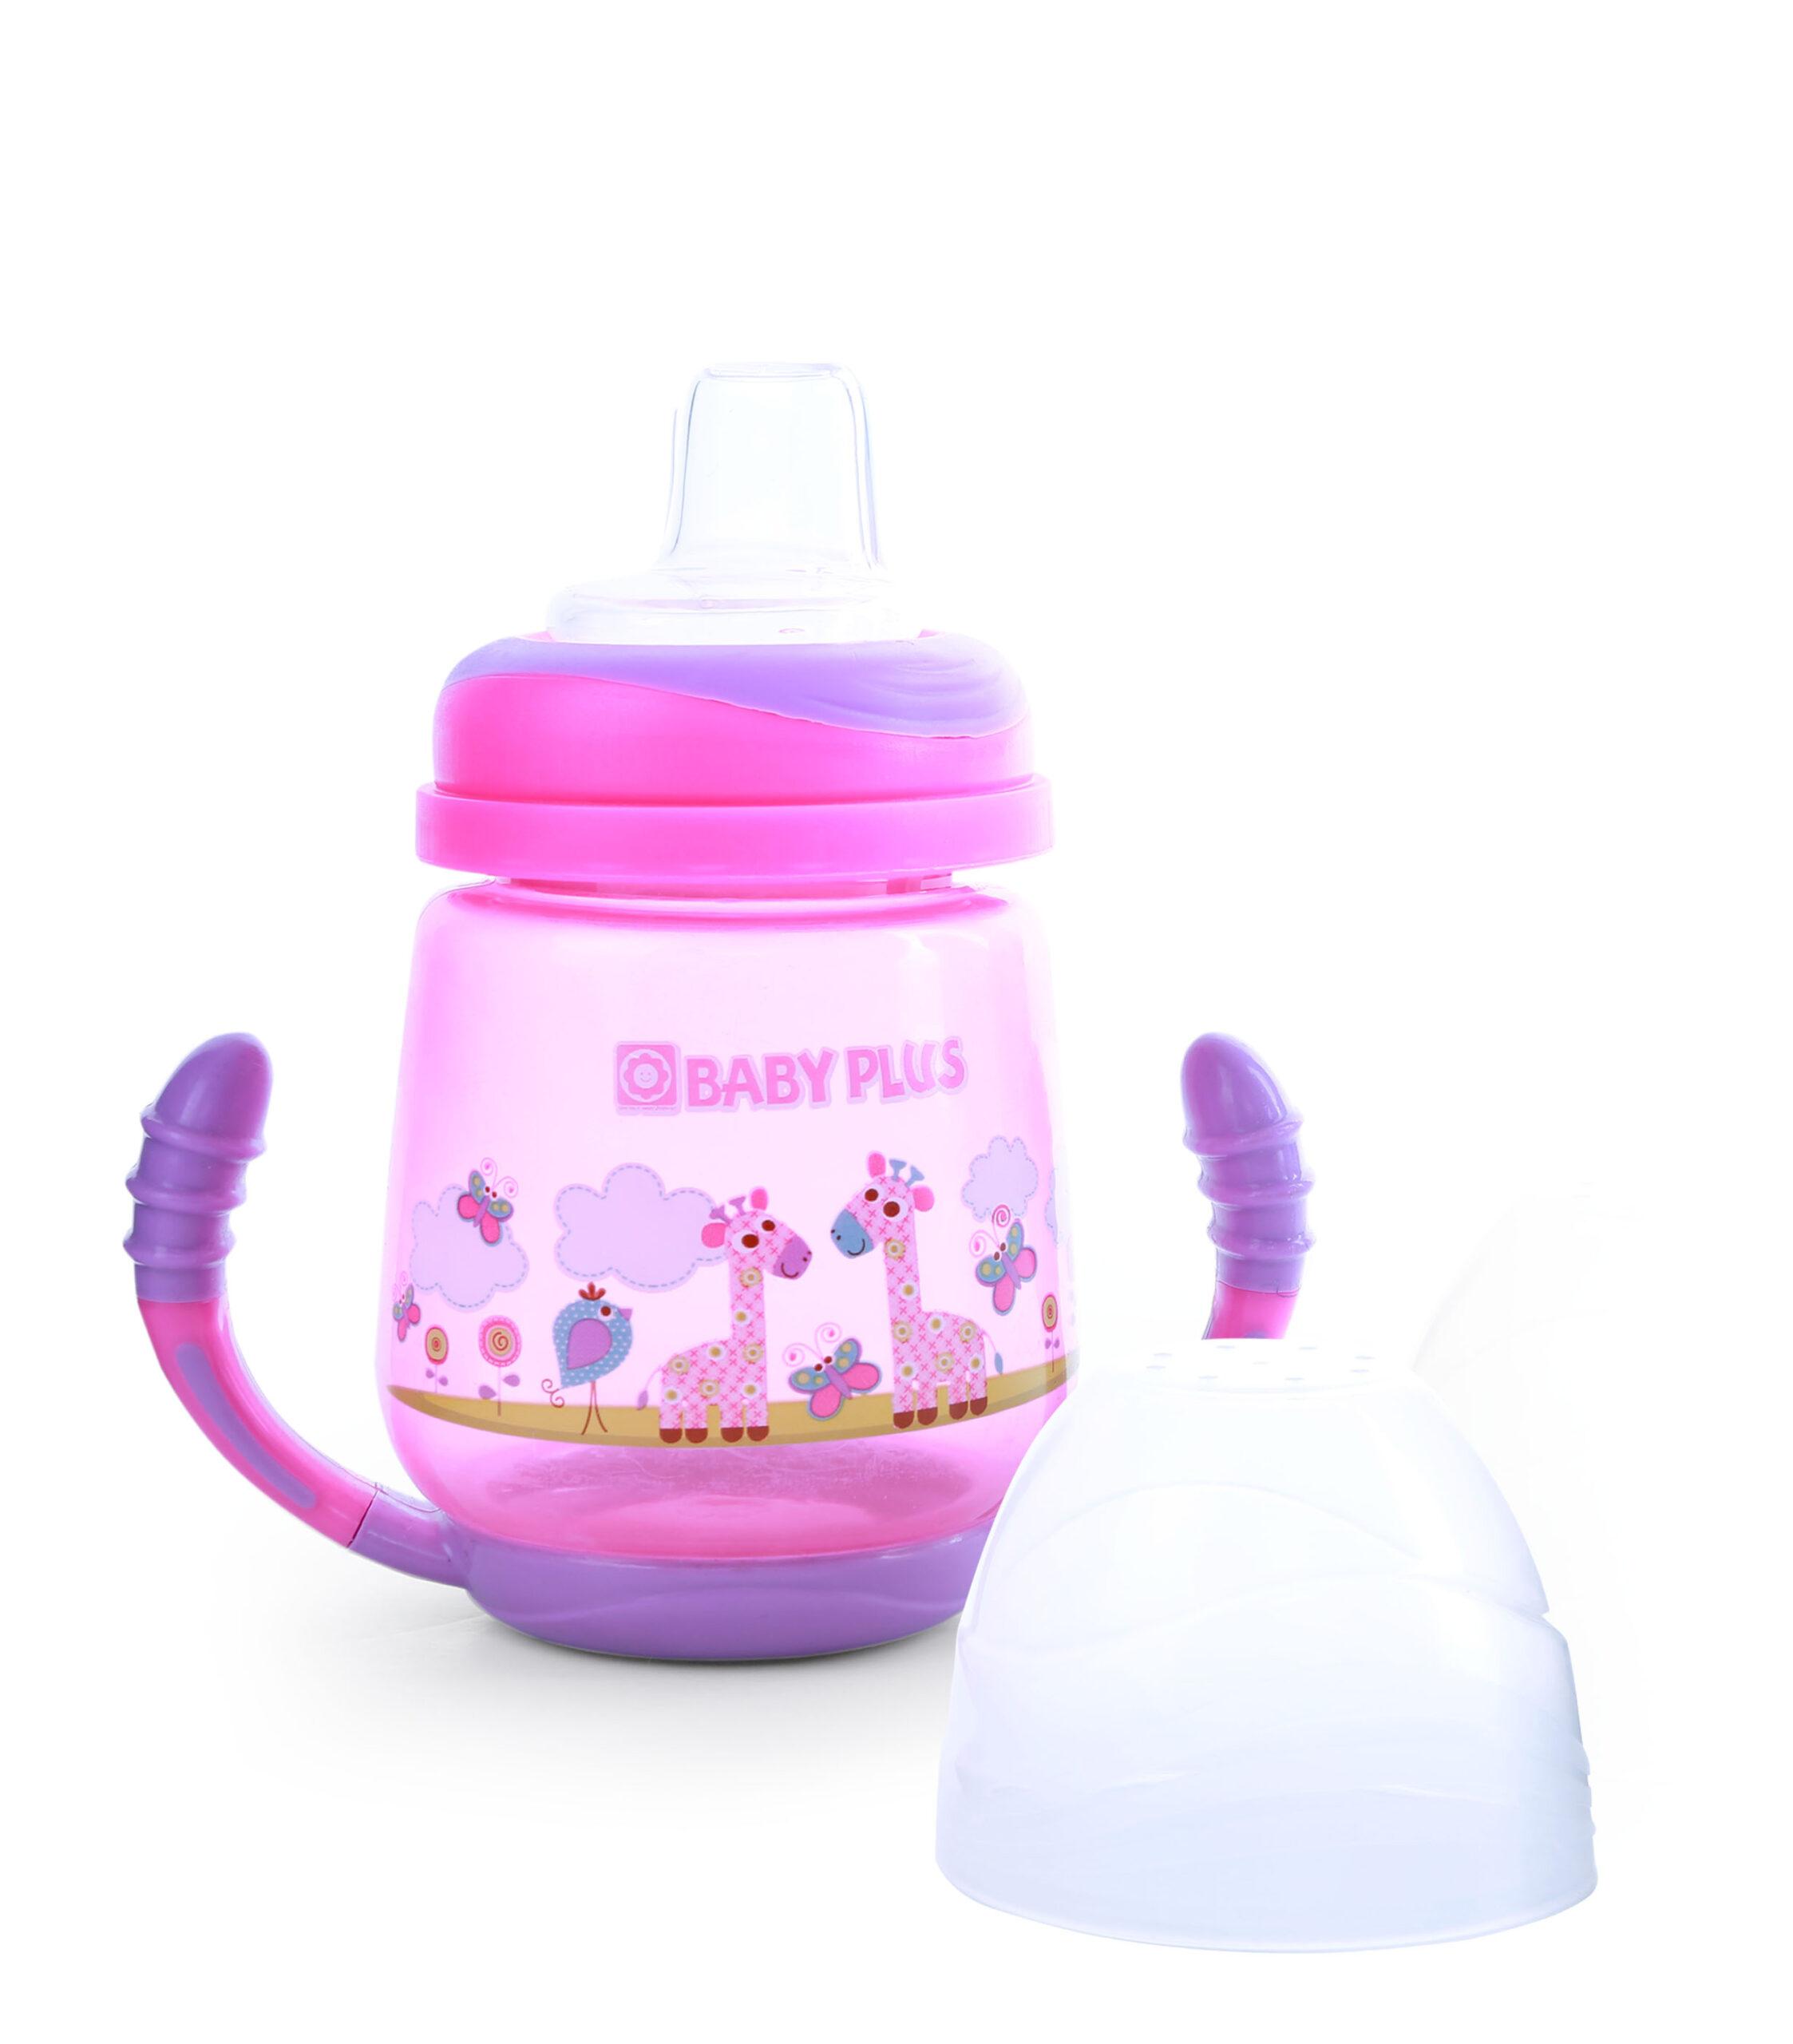 Baby Plus BP7269 Baby Feeding Bottle - Portable Baby Cup First Cups, Anti-Colic Baby Bottle, Safe Material | No Leakage, New-born Essentials, Free Flow Baby Cup | Ideal for Water Juice & Mor